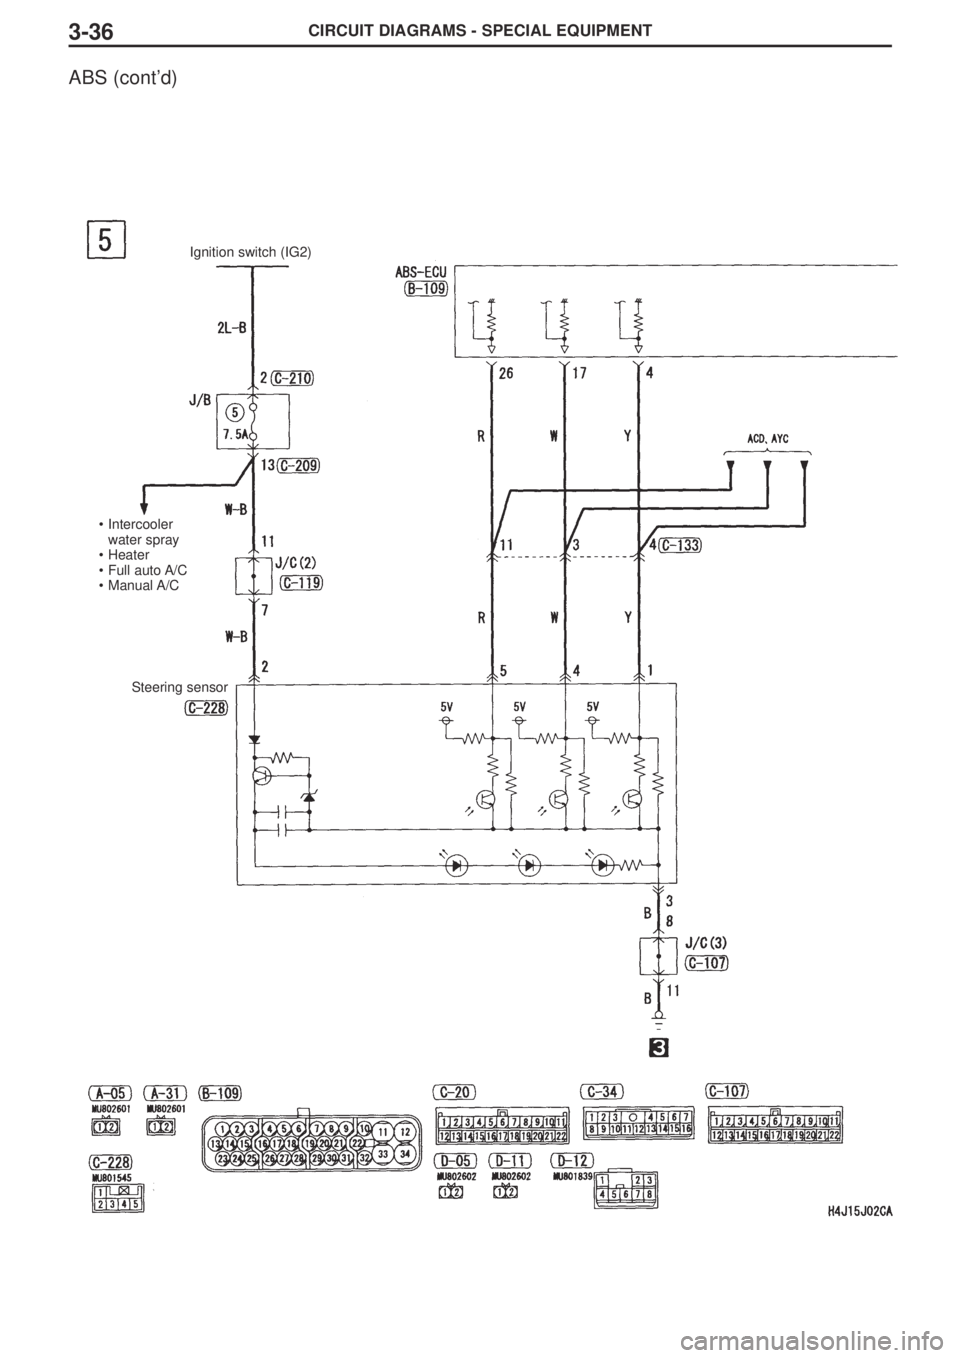 MITSUBISHI LANCER EVOLUTION VIII 2004  Workshop Manual CIRCUIT DIAGRAMS - SPECIAL EQUIPMENT3-36
ABS (cont’d)
Ignition switch (IG2)
•Intercooler 
water spray 
•Heater
•Full auto A/C
•Manual A/C
Steering sensor 